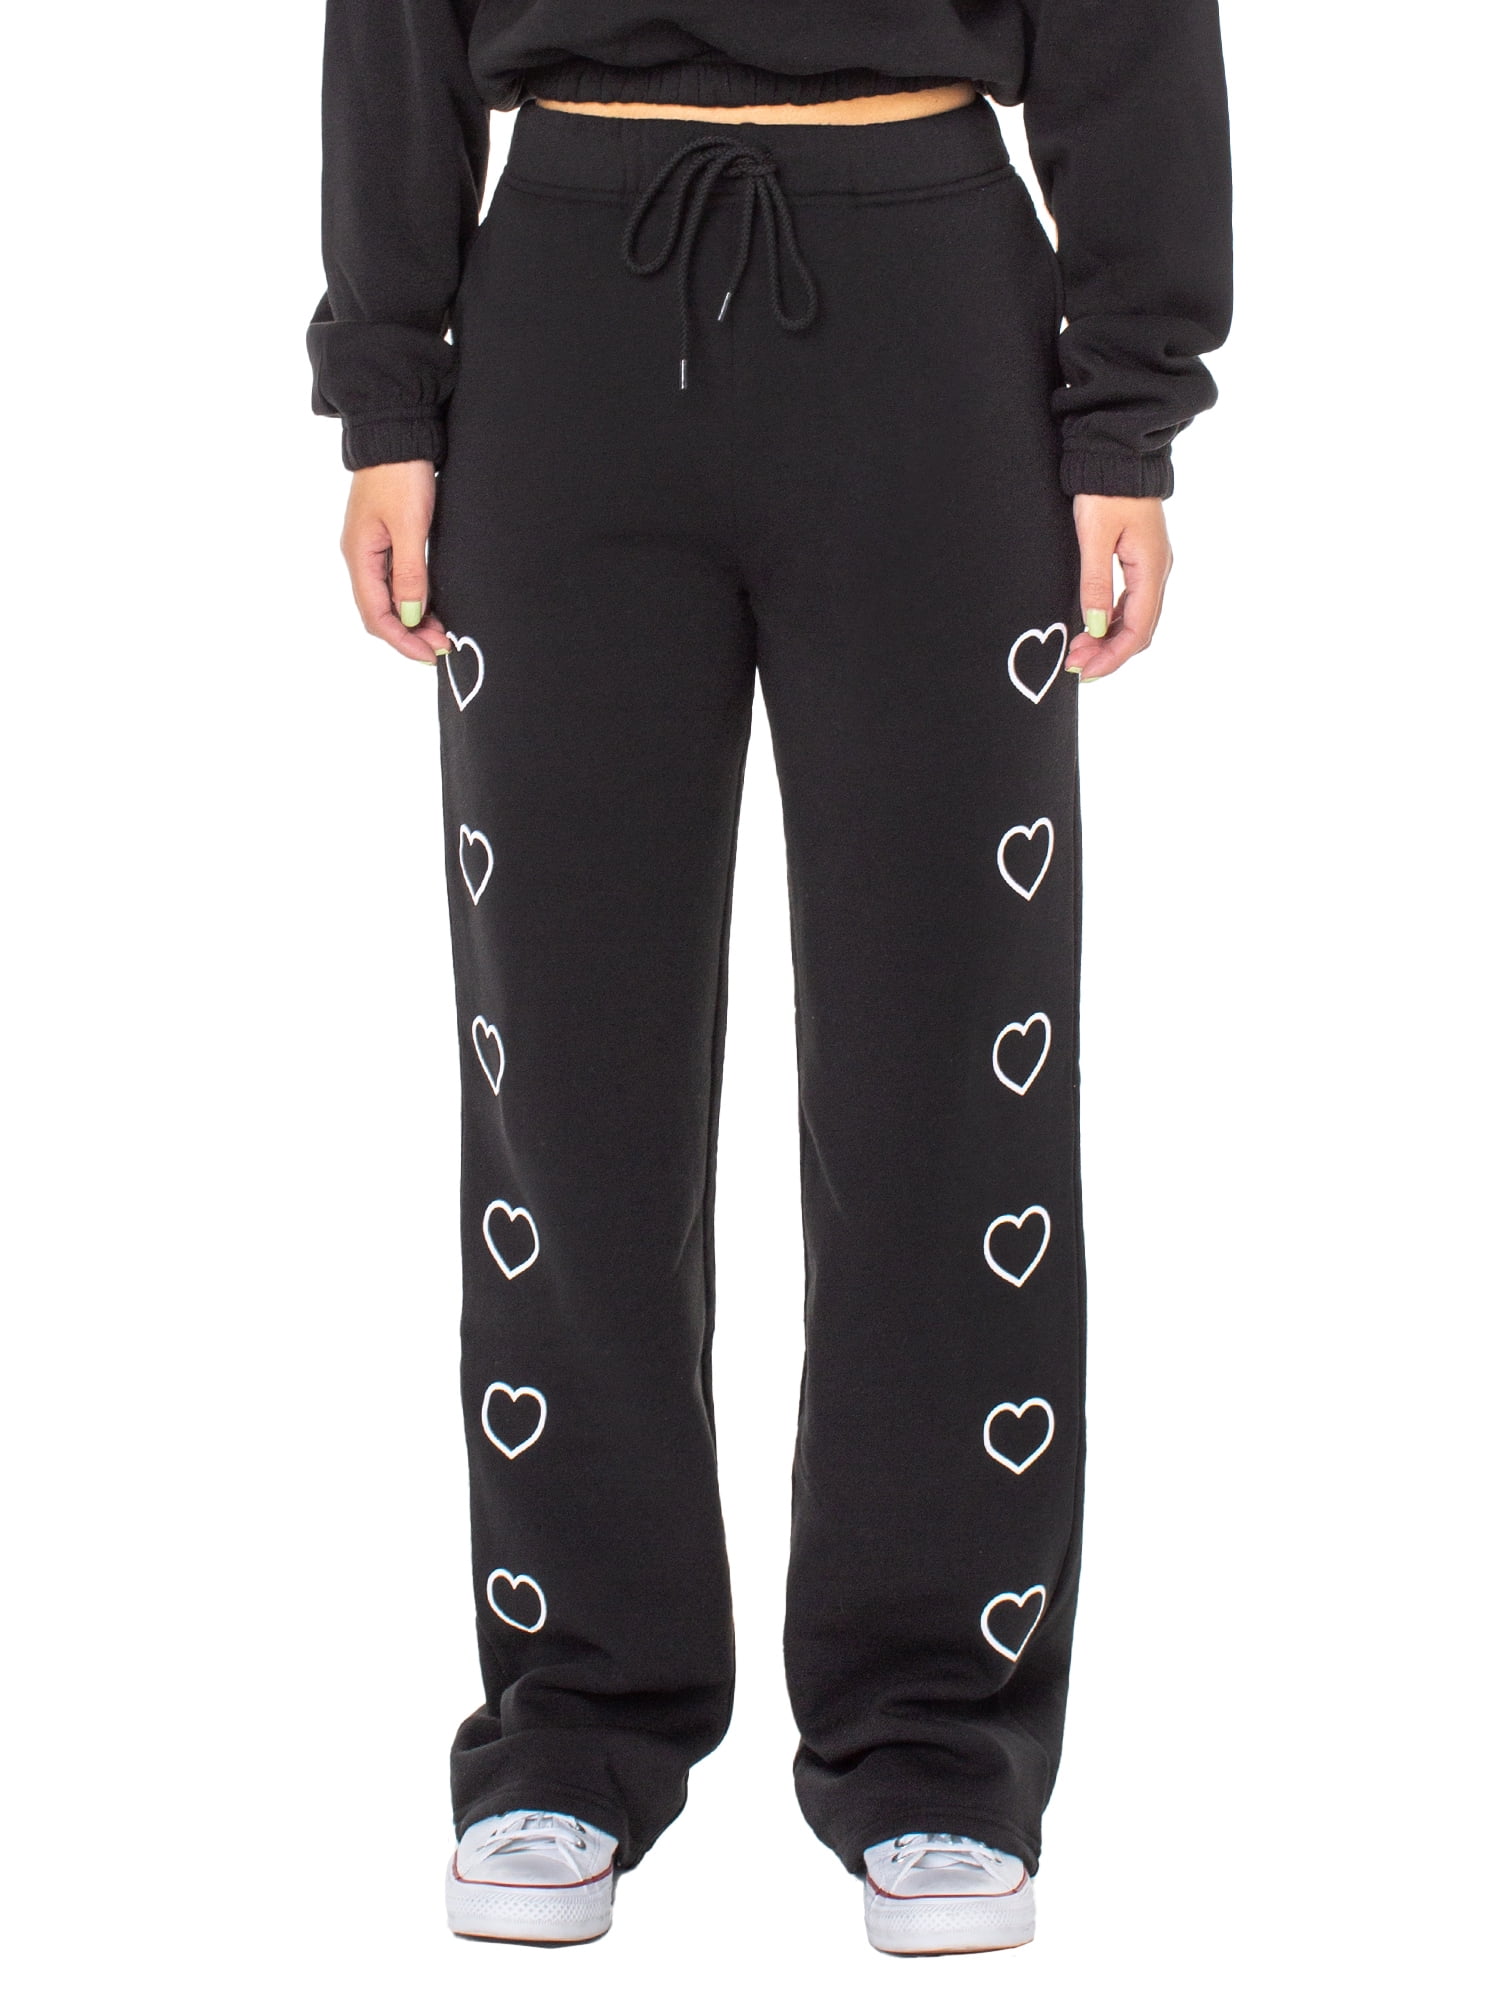 No Boundaries Juniors Double Zip Top and Pull On Flare Pants Set, 2-Piece,  Sizes XS-XXXL 